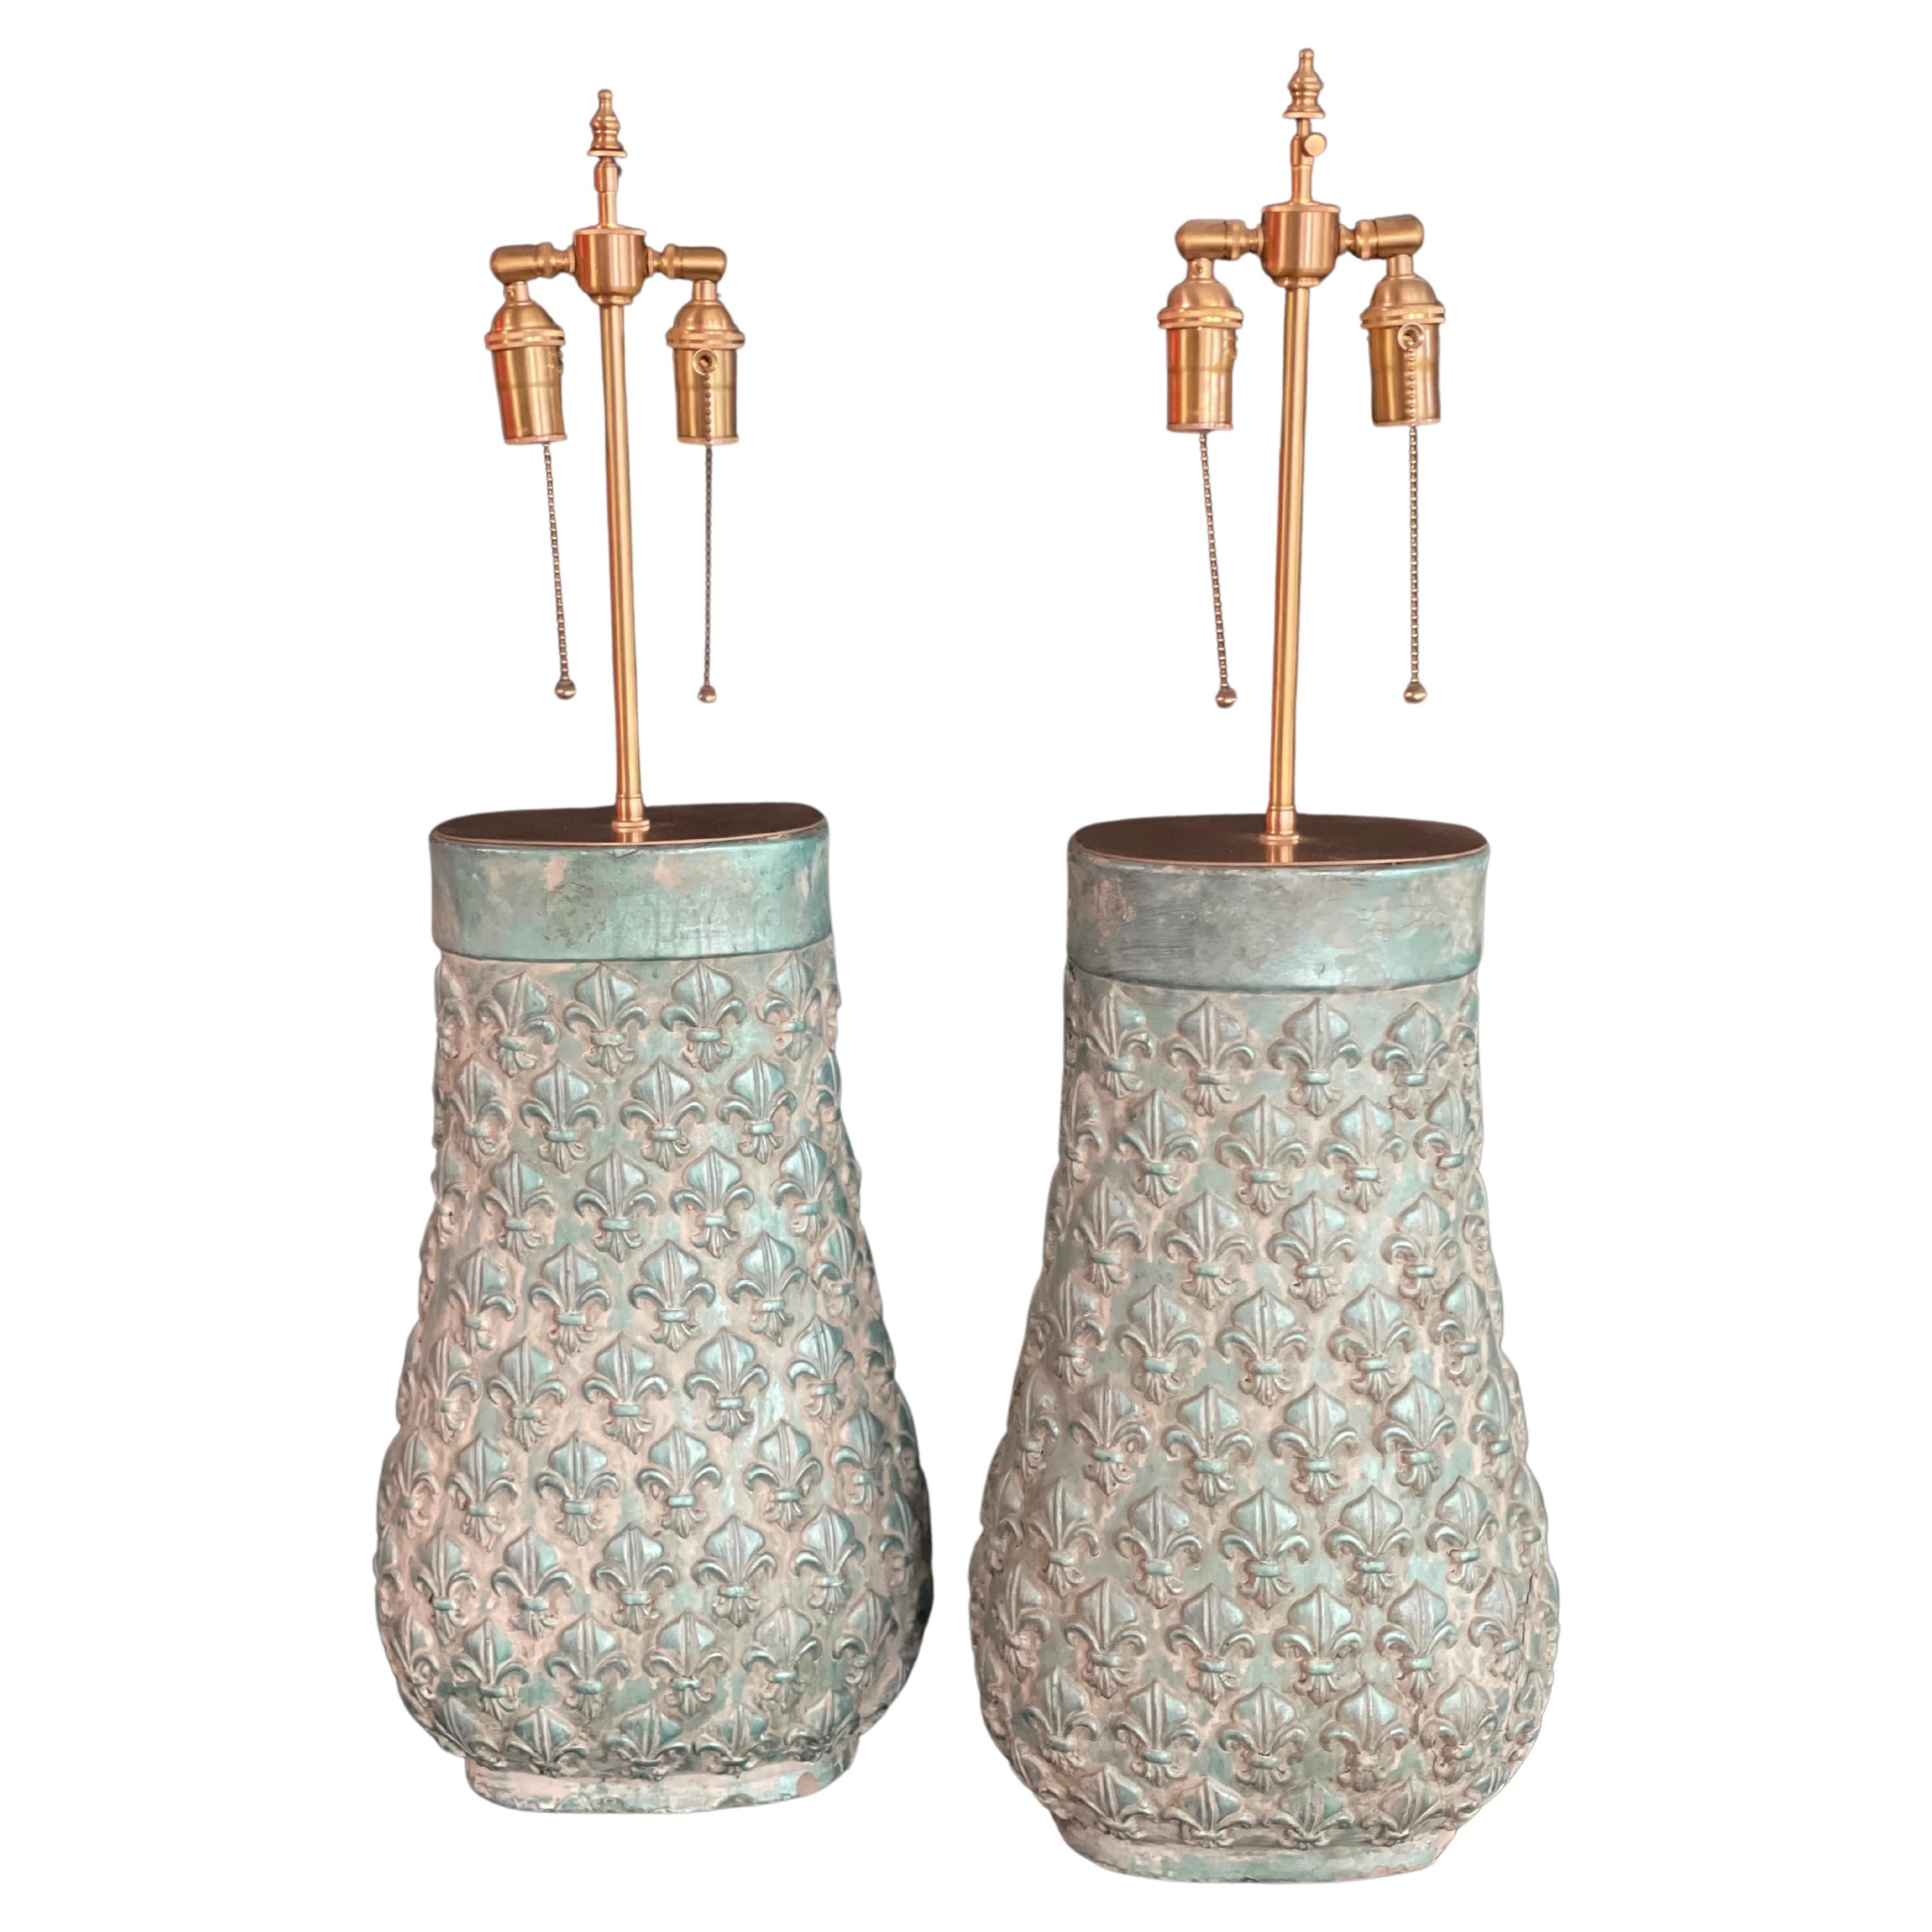 This Pair of Monumental  French Patinaed Fleur De Lis Gourdes With Lamp application have so much appeal as they add a tremendous character to any space with the beautiful patina, shape,  and design pattern details. 